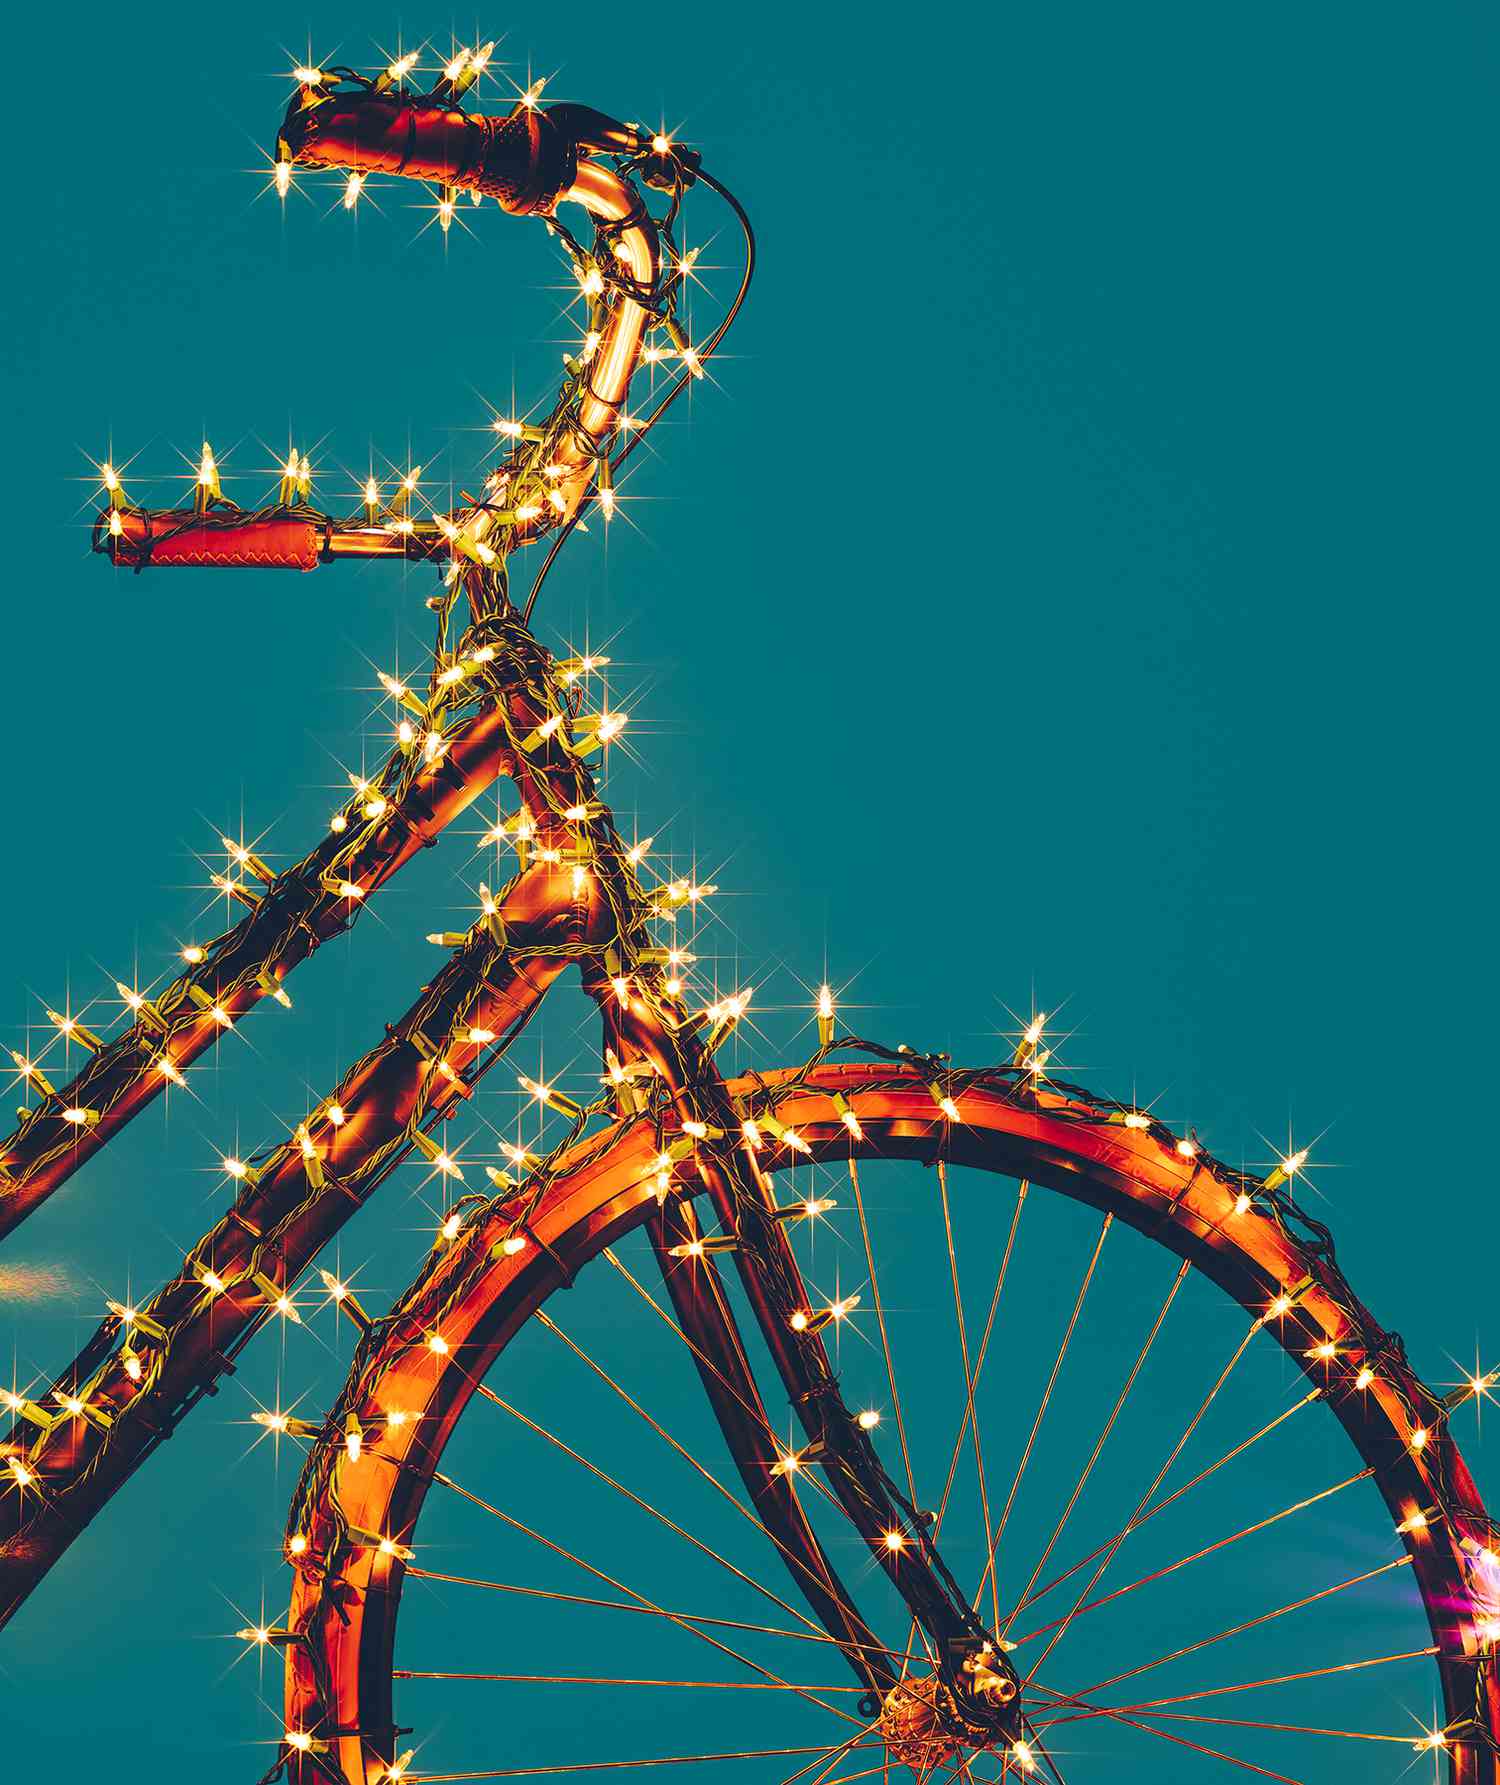 Bicycle wrapped in lights